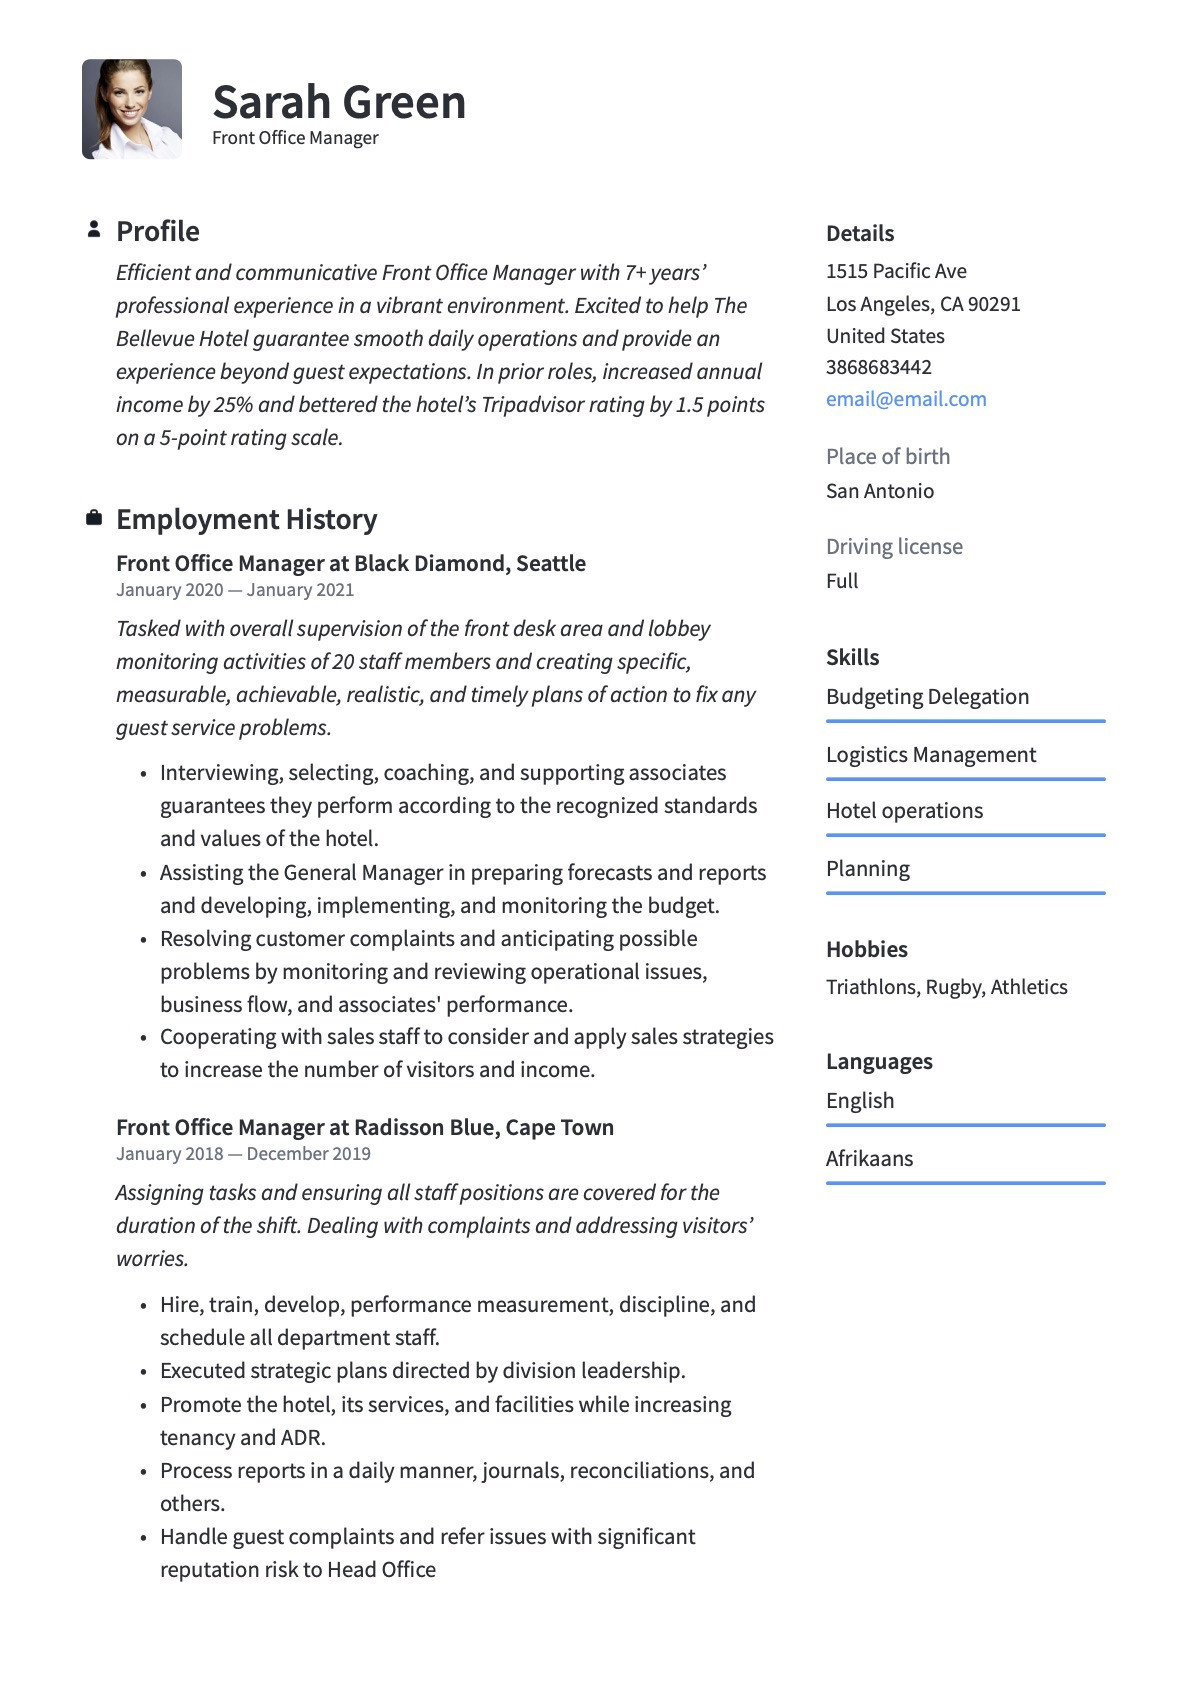 Sample Resume for Front Office Coordinator Front Office Manager Resume & Guide  20 Free Templates 2022